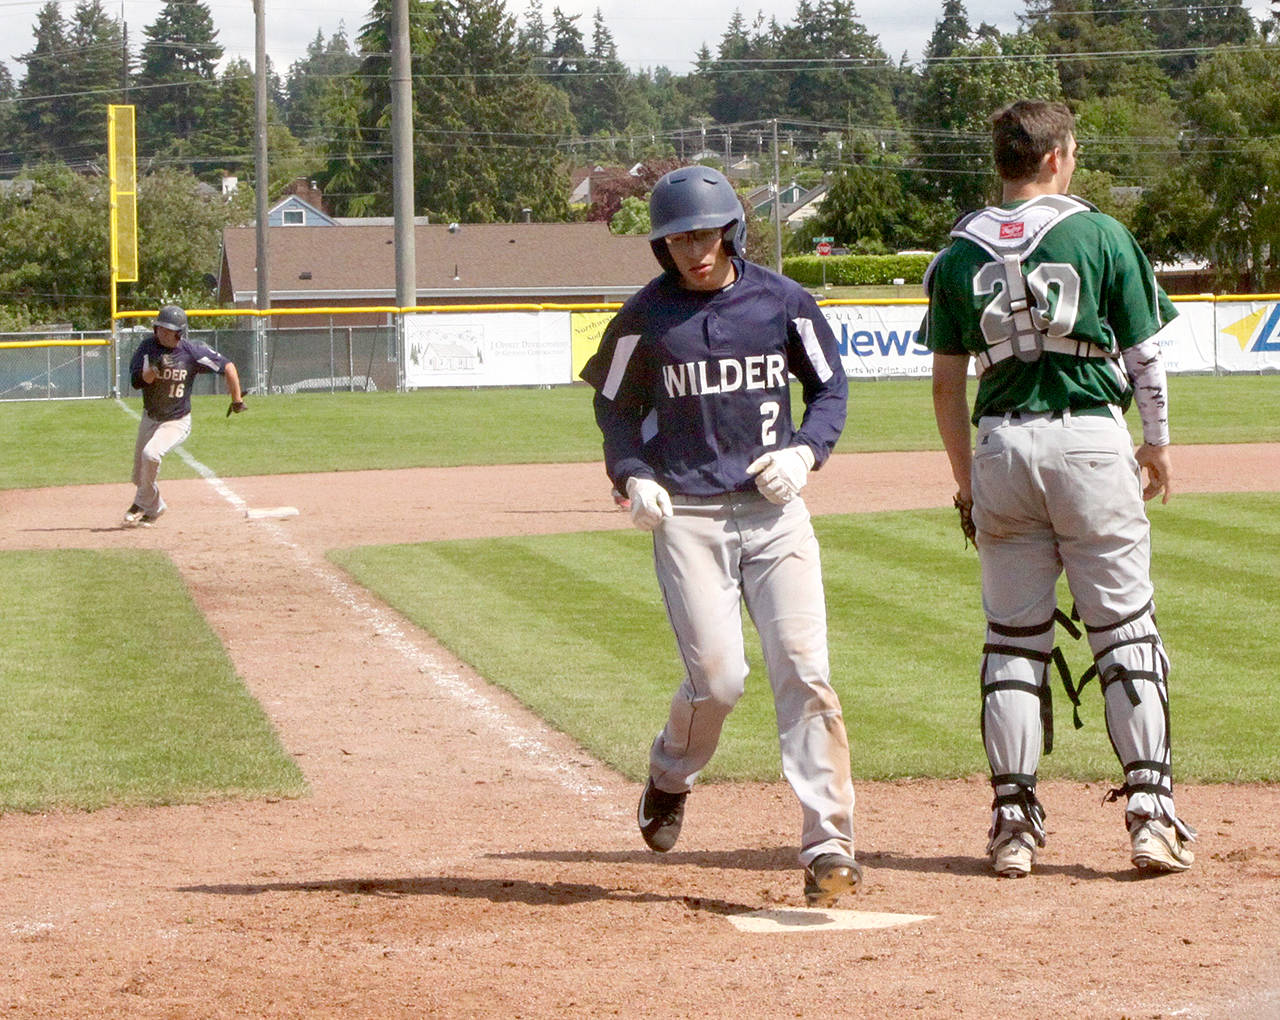 Dave Logan/for Peninsula Daily News Wilder Senior’s Gavin Guerrero scores while teammate Matt Hendry rounds third base during a game against Lakeside Recovery earlier this summer.